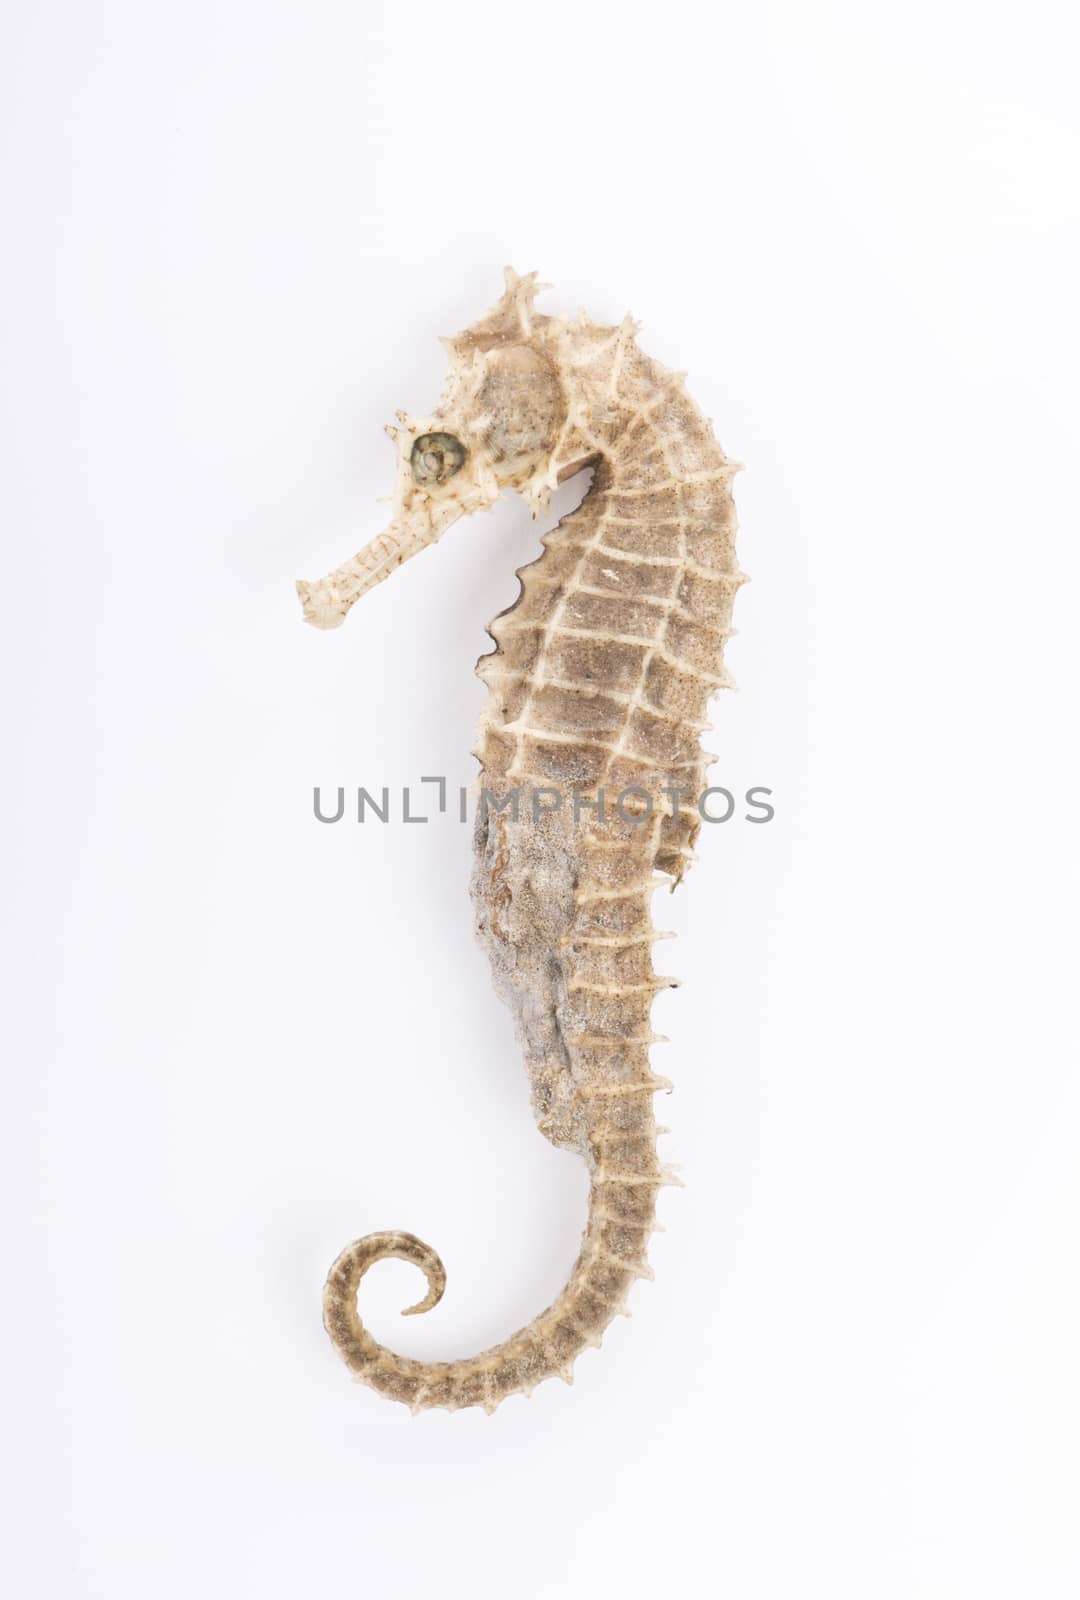 Seahorse in front of white background 